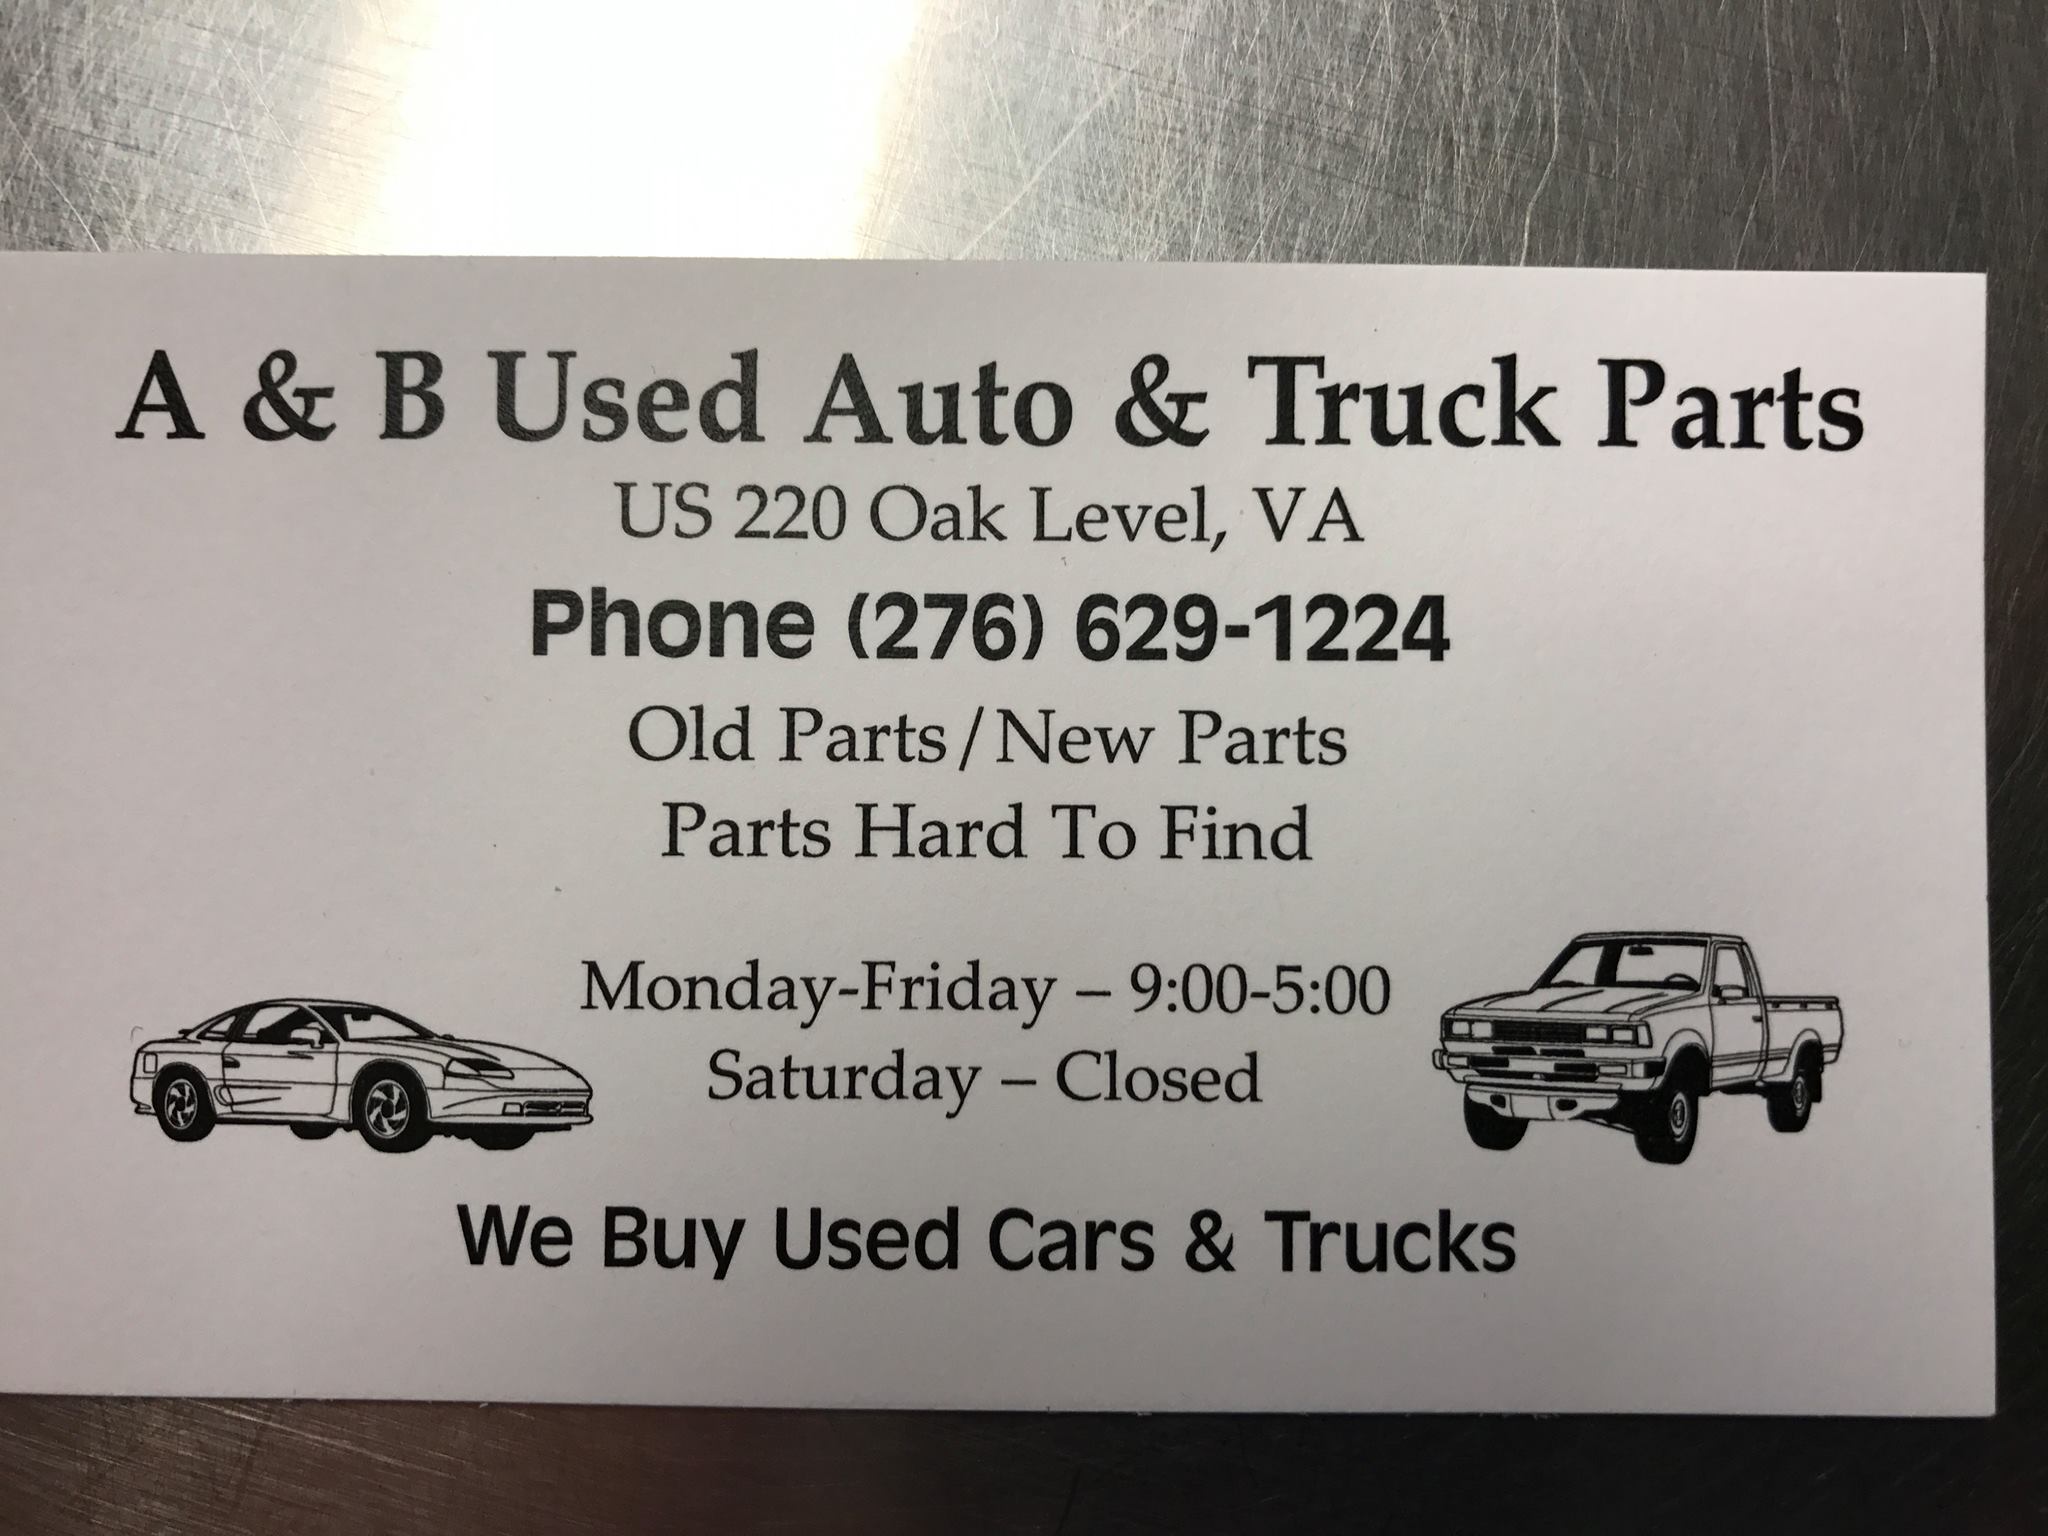 A & B Used Auto & Truck Parts